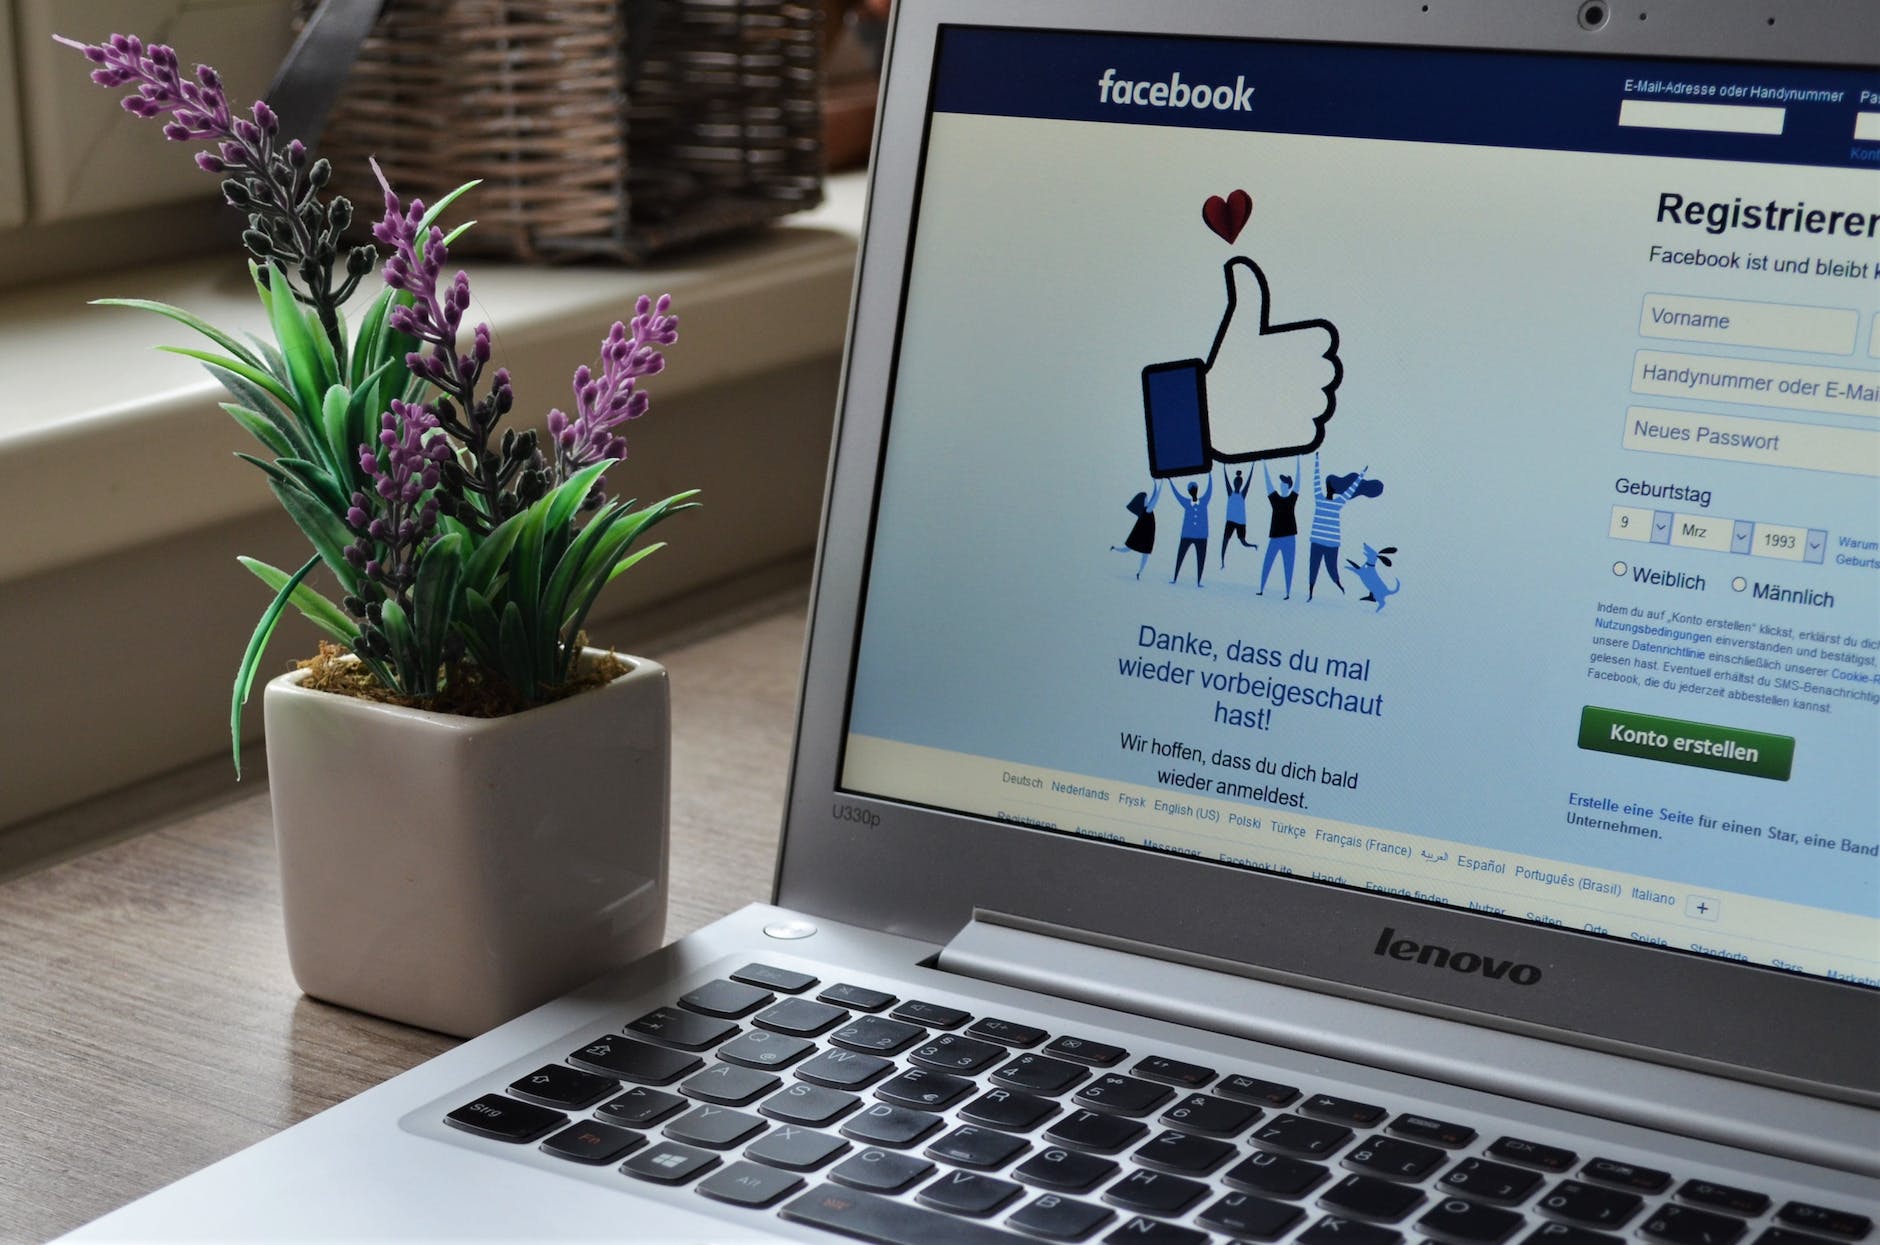 How To Create Facebook Account